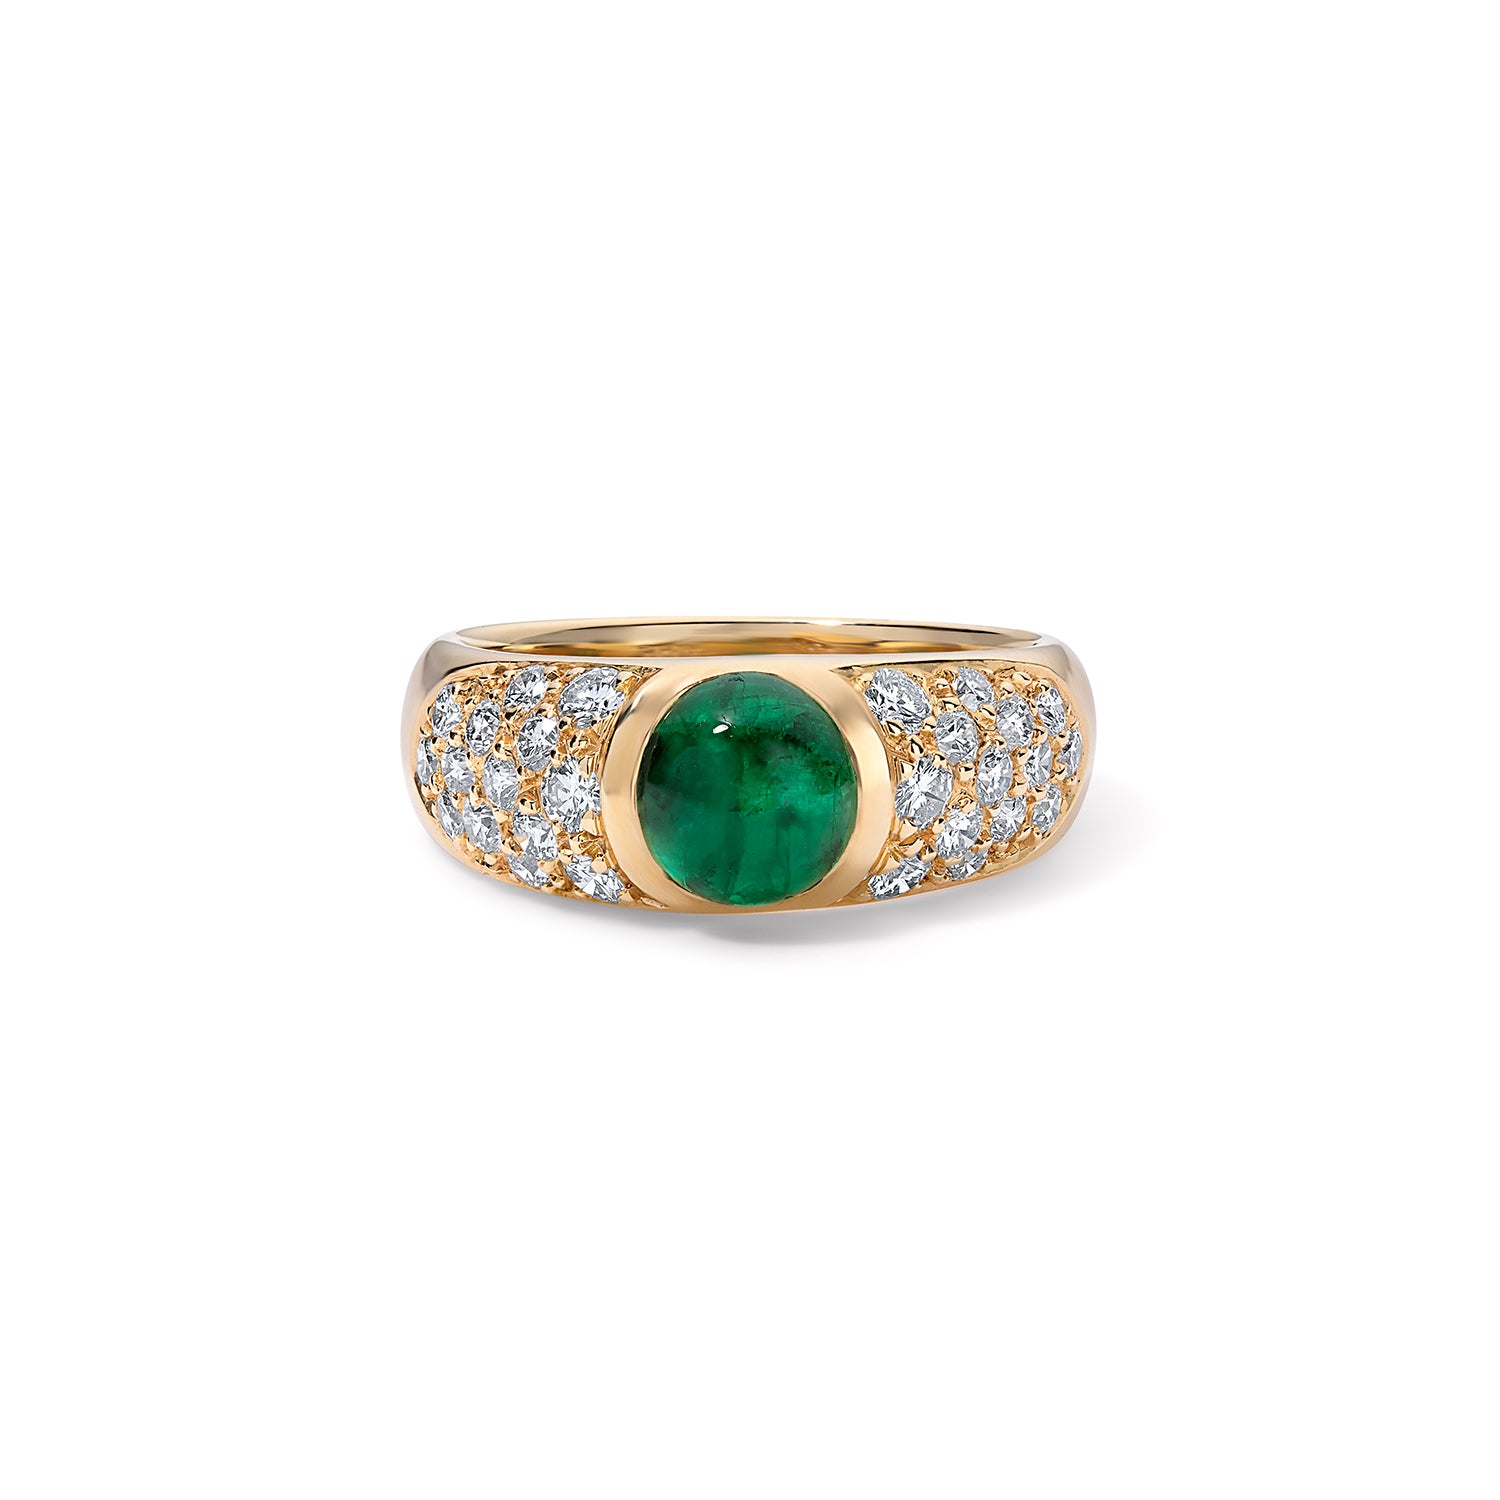 Vintage Cabochon Emerald and Diamond Ring